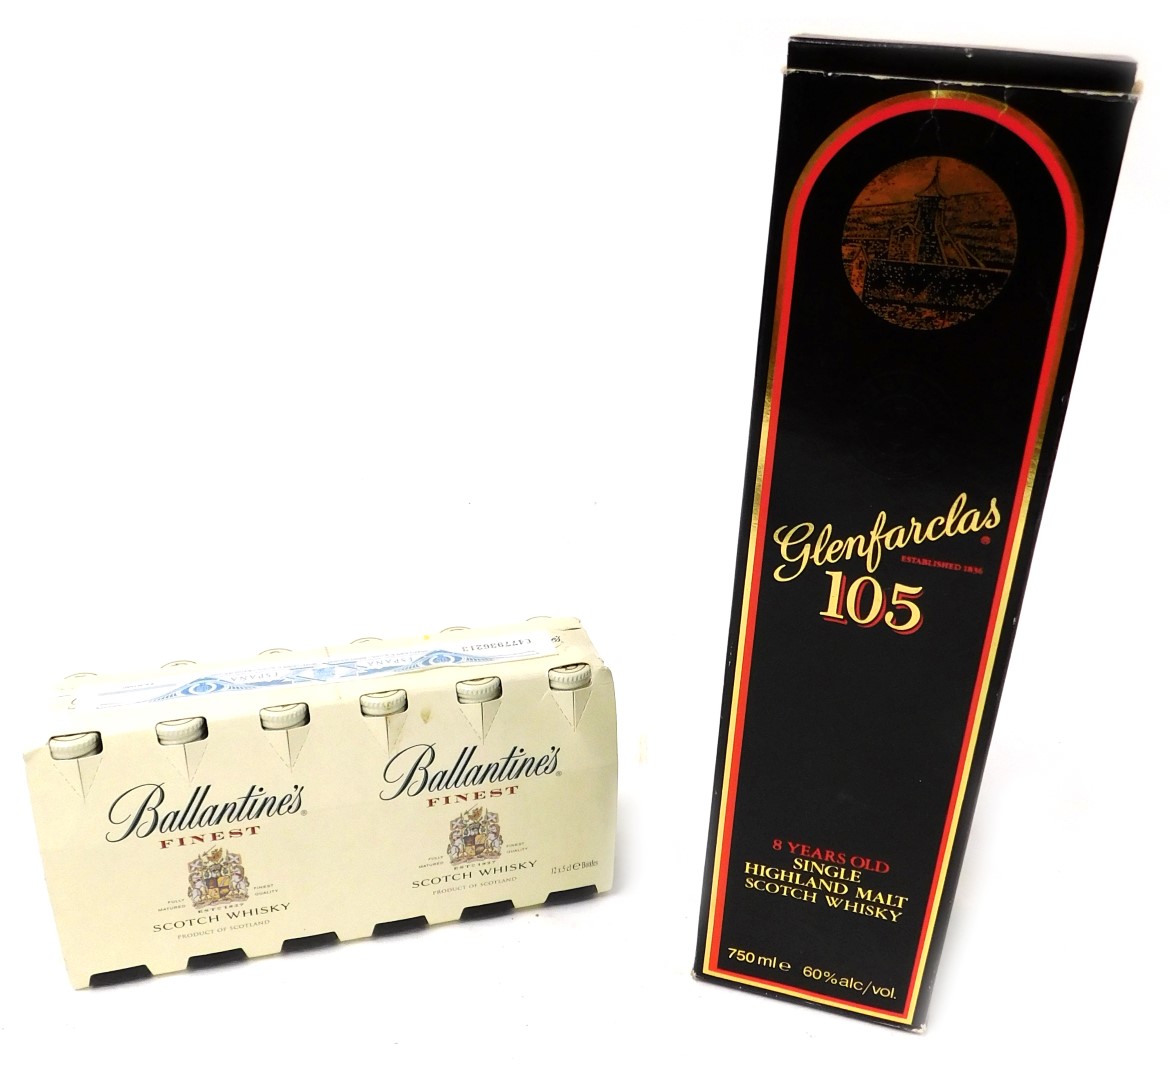 A bottle of Glenfarclas 105 highland malt scotch whisky, 8 years old, 750ml, boxed, together with tw